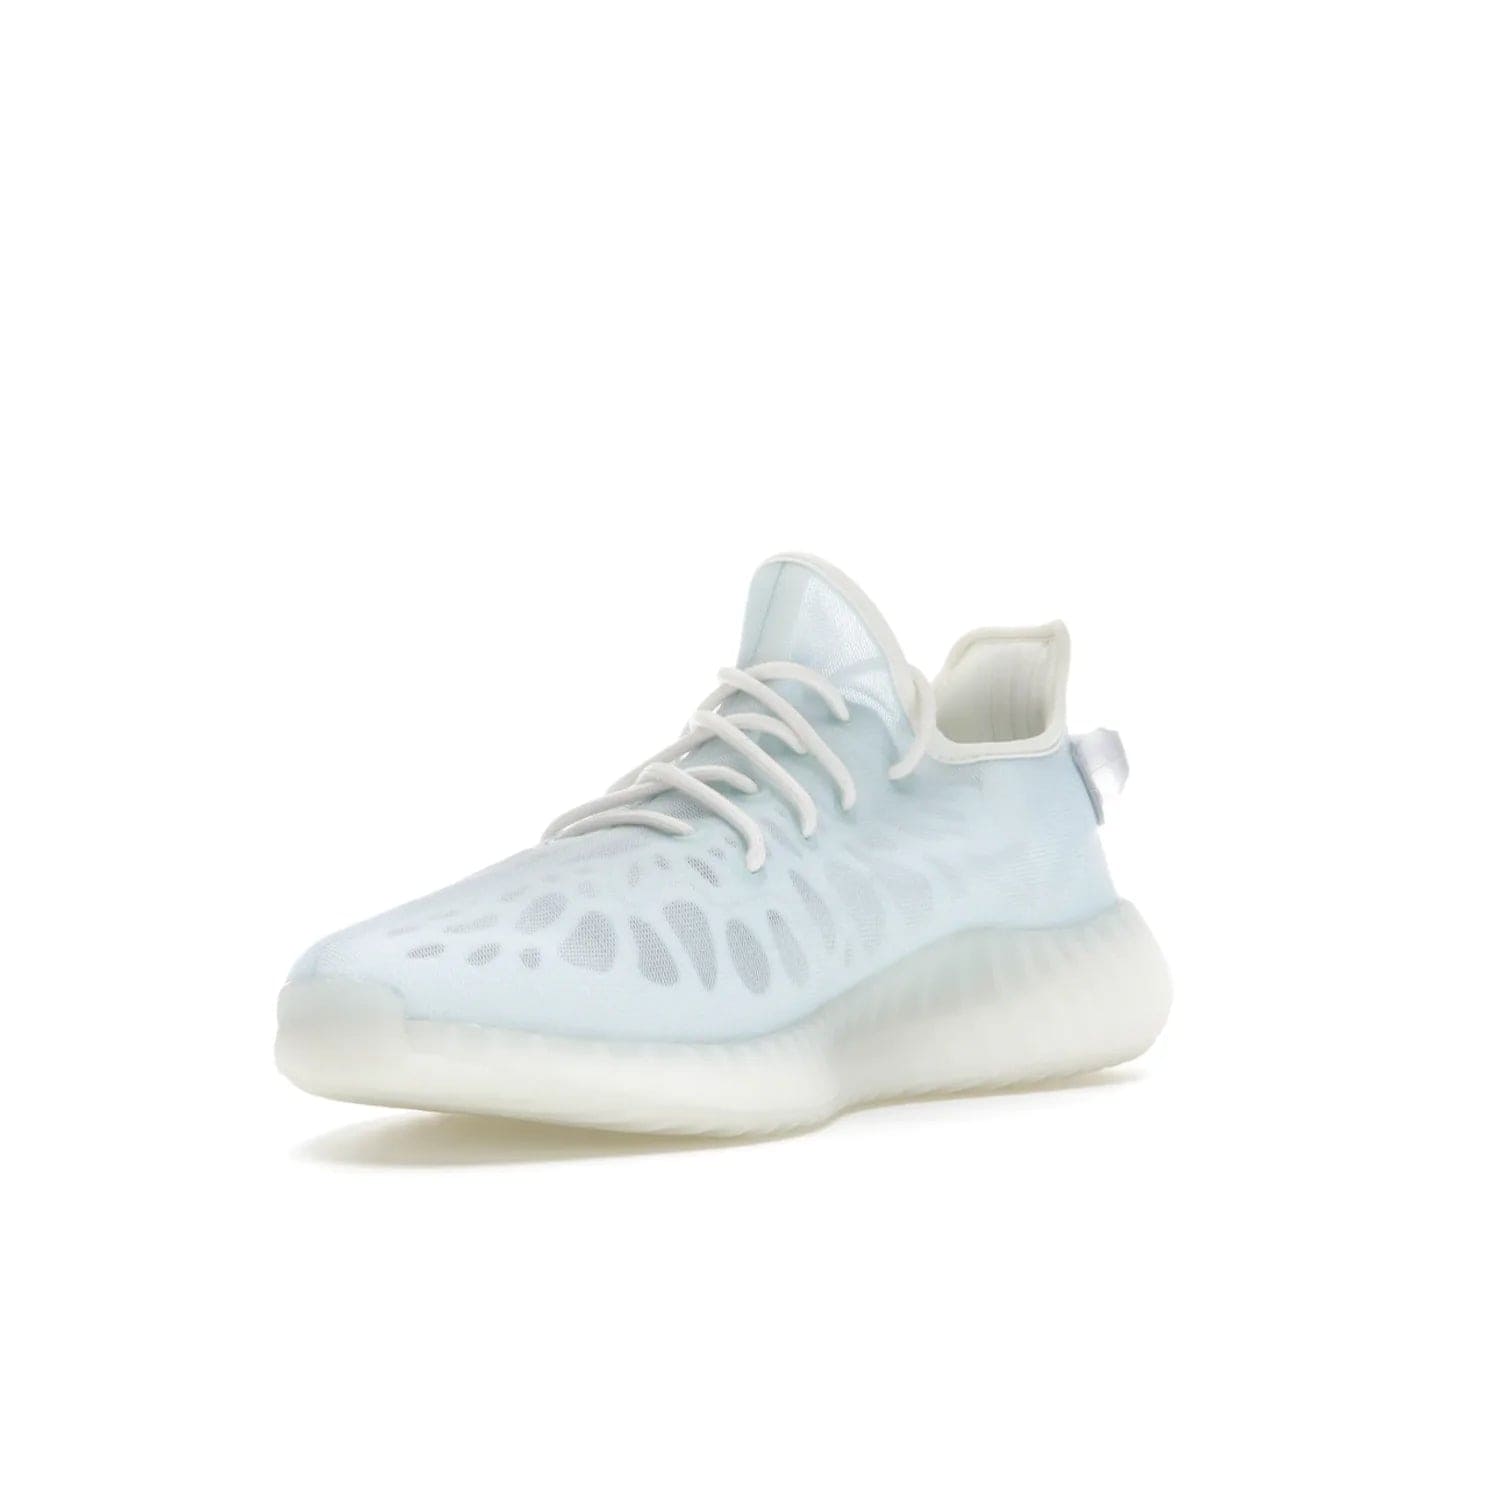 adidas Yeezy Boost 350 V2 Mono Ice - Image 14 - Only at www.BallersClubKickz.com - Introducing the adidas Yeezy 350 V2 Mono Ice - a sleek monofilament mesh design in Ice blue with Boost sole and heel pull tab. Released exclusively in the US for $220.